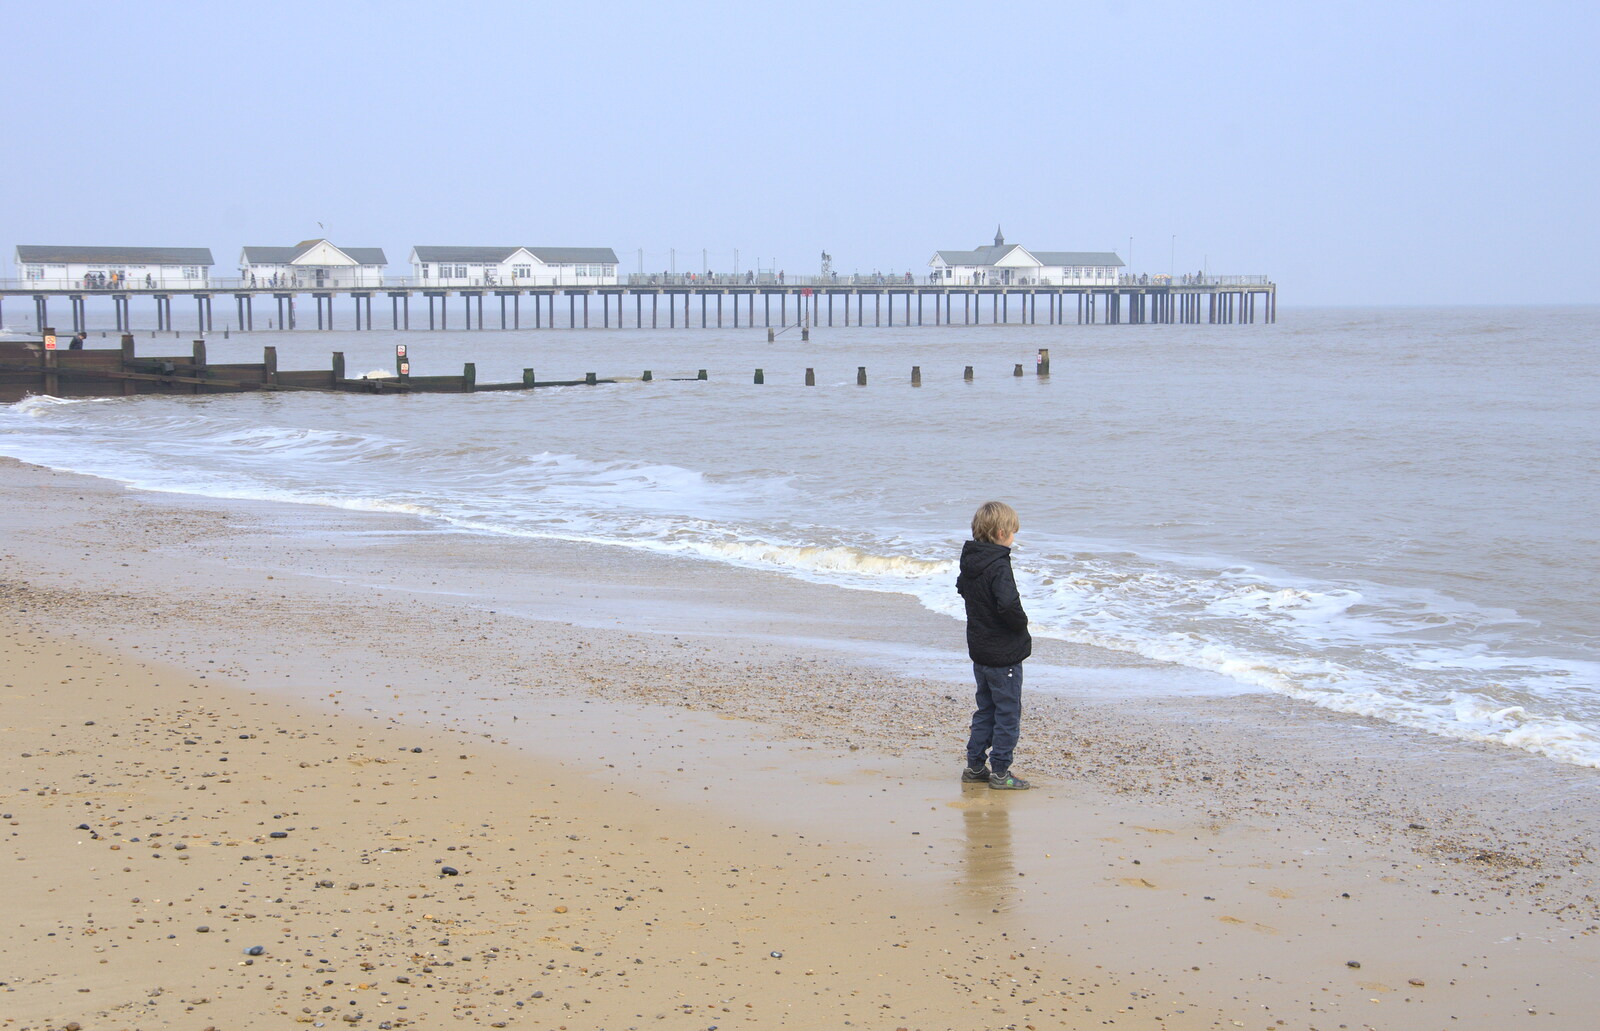 Harry stares at the sea from On The Beach, Southwold, Suffolk - 7th April 2019